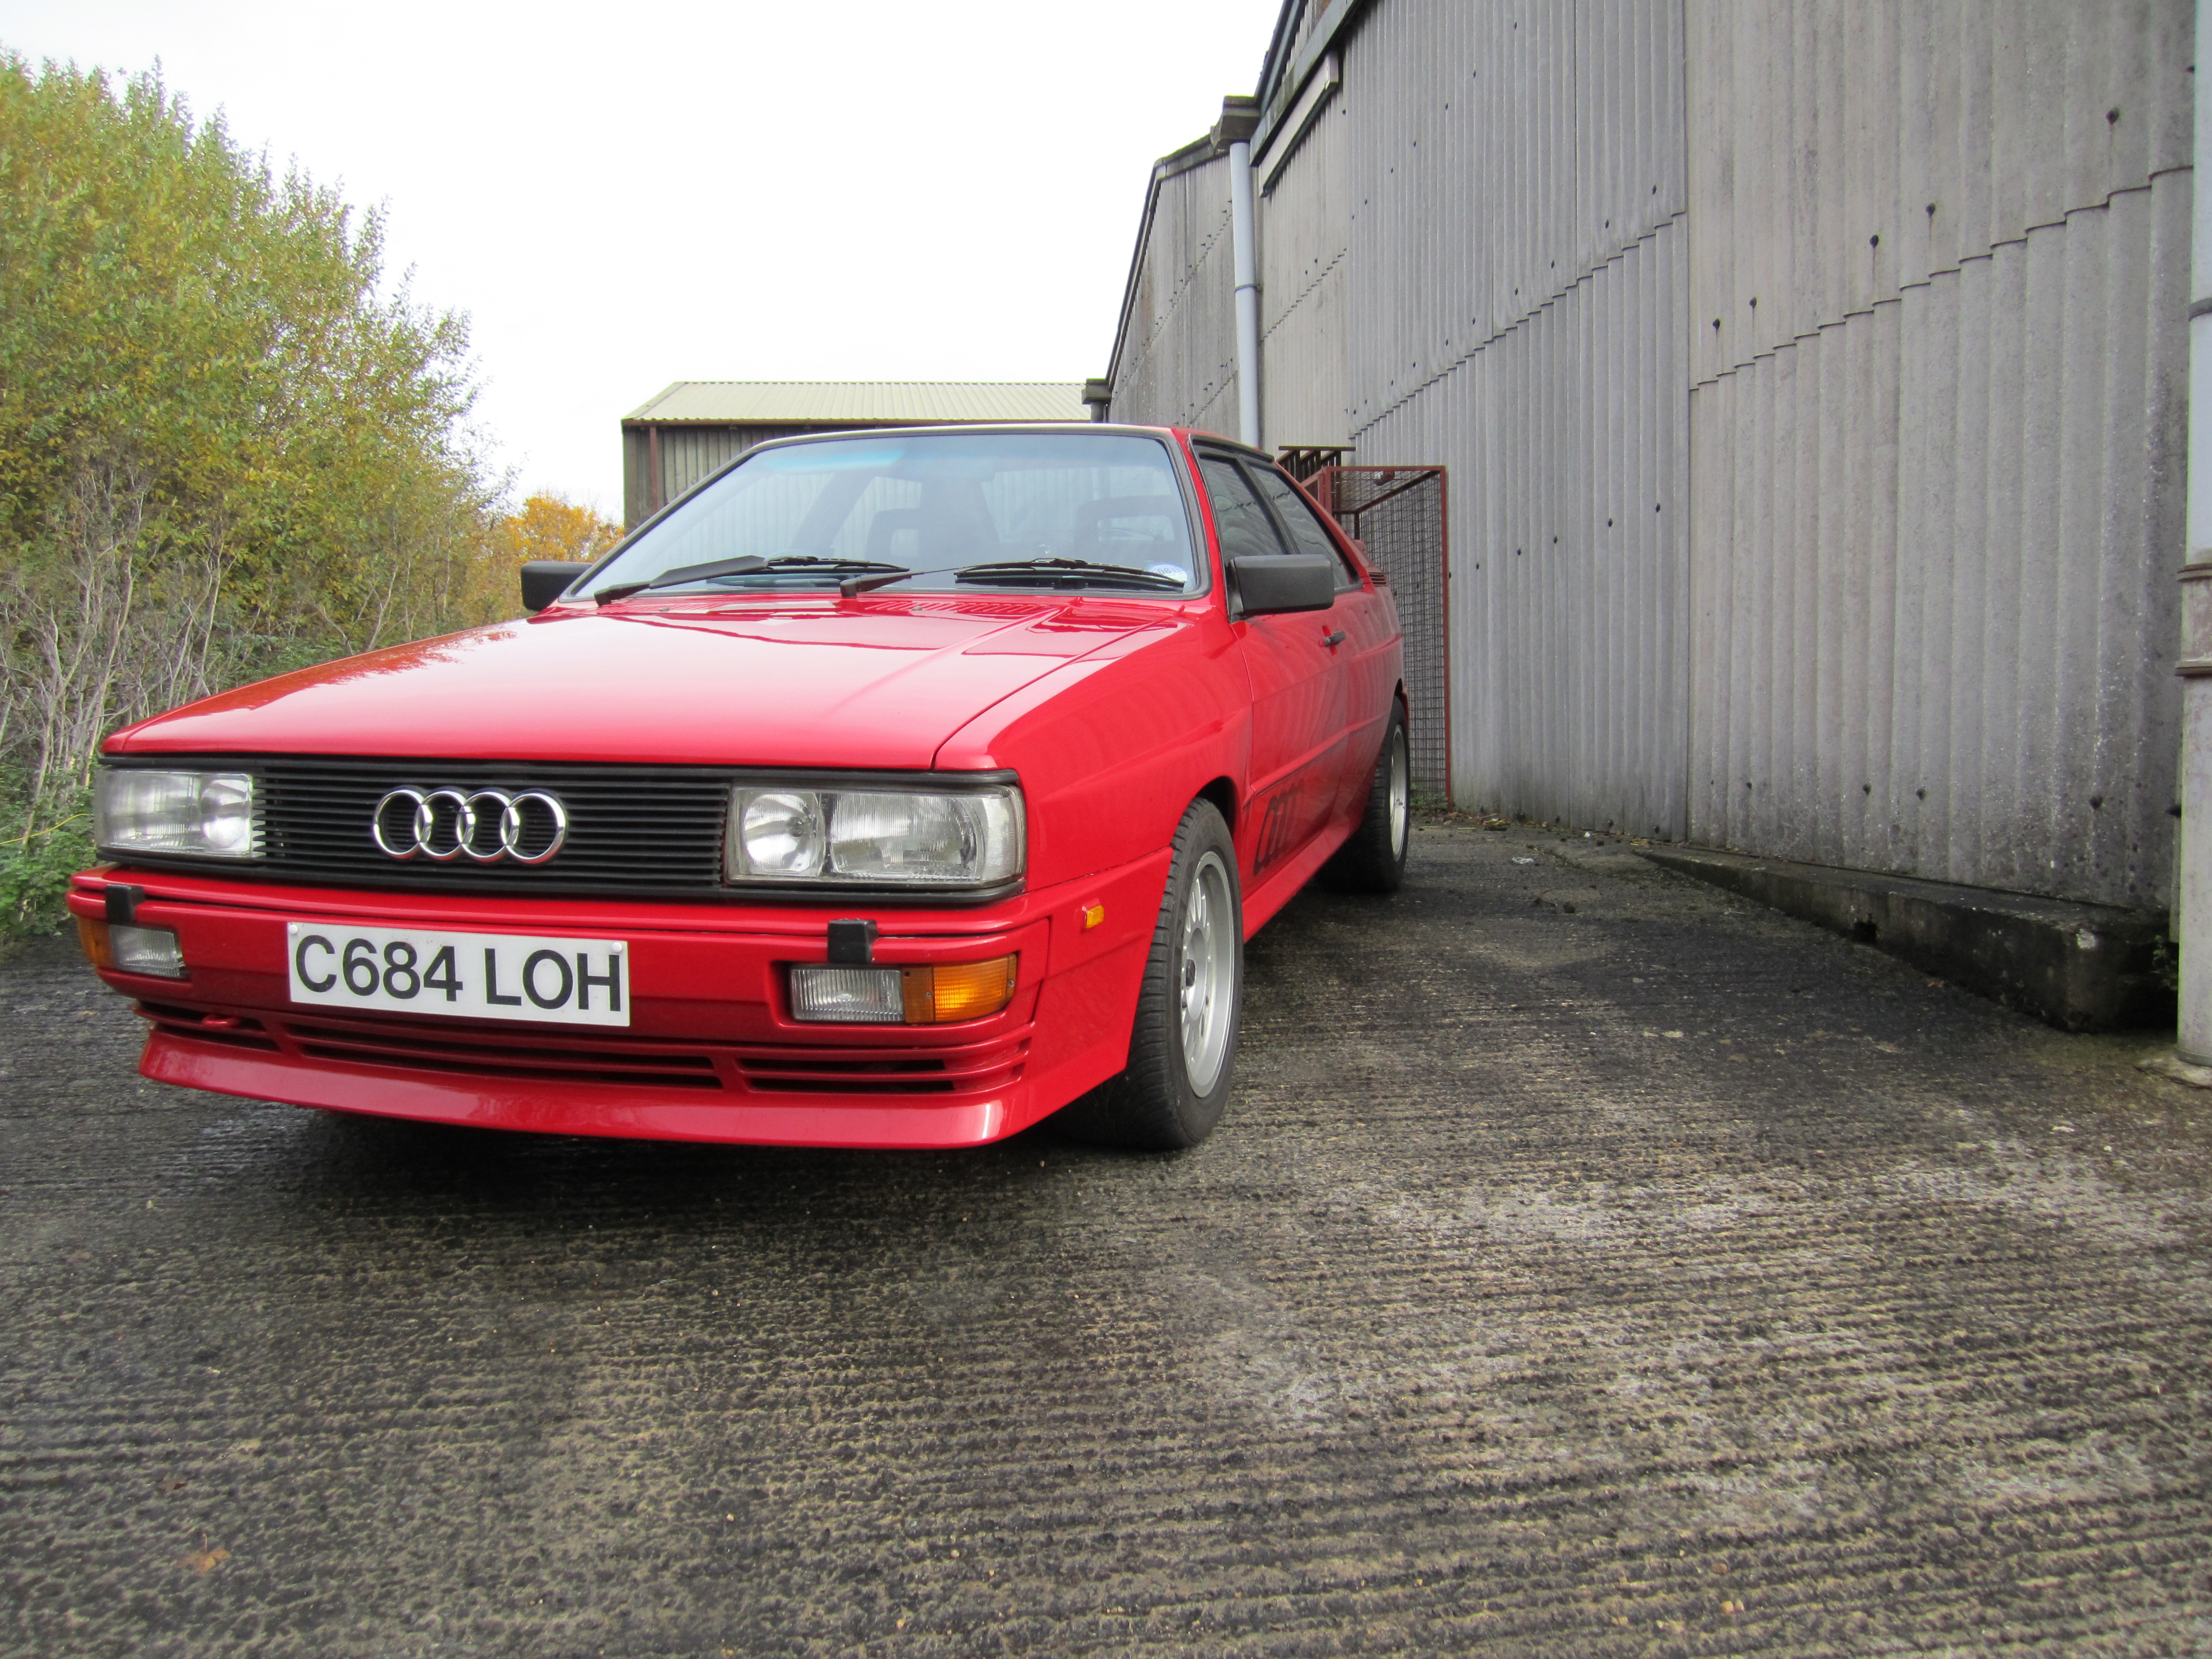 Audi owes much to this car